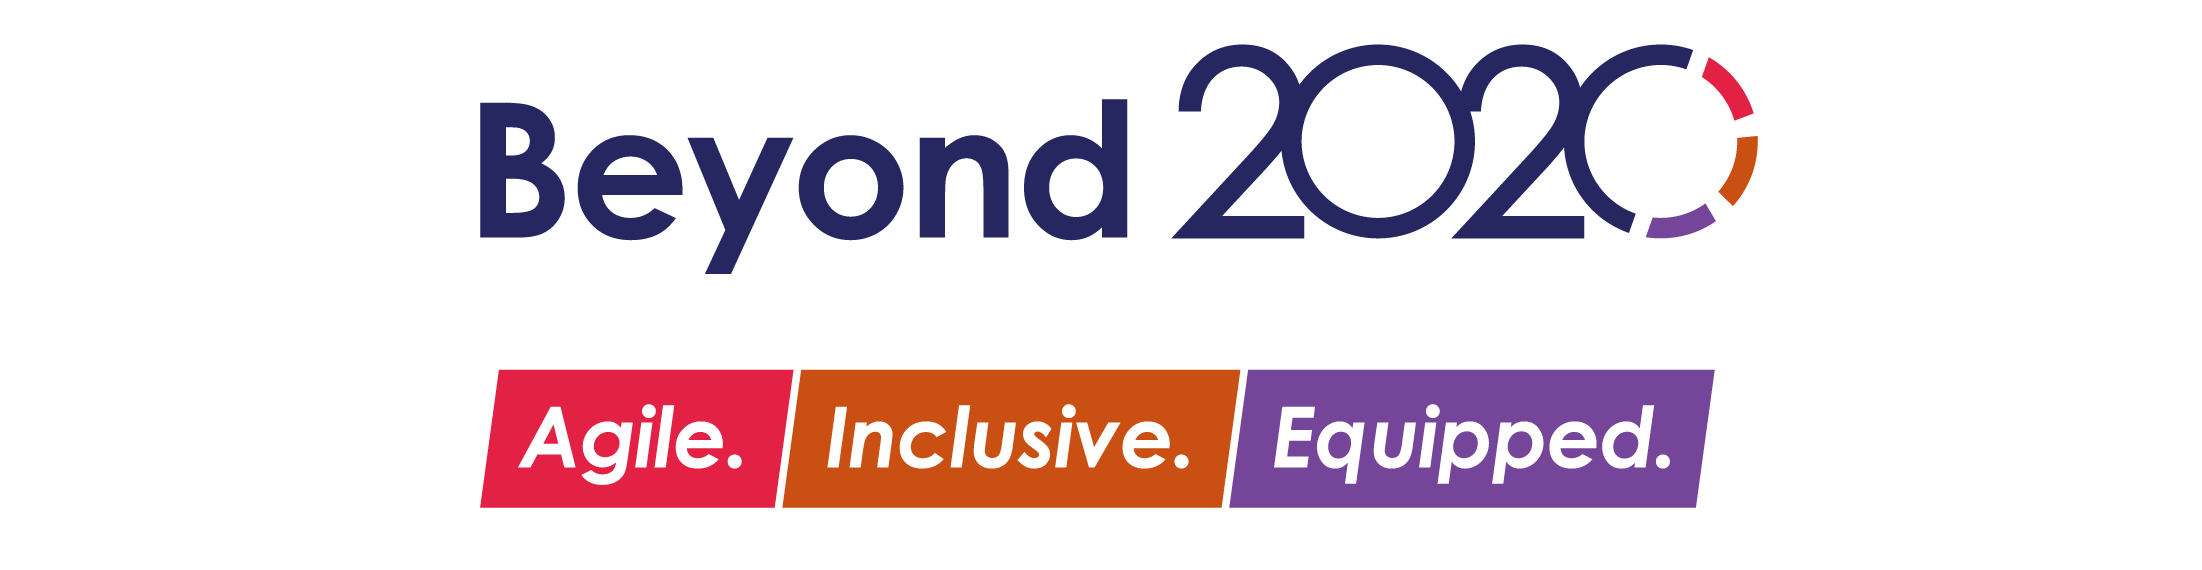 Beyond 2020: Agile. Inclusive. Equipped.